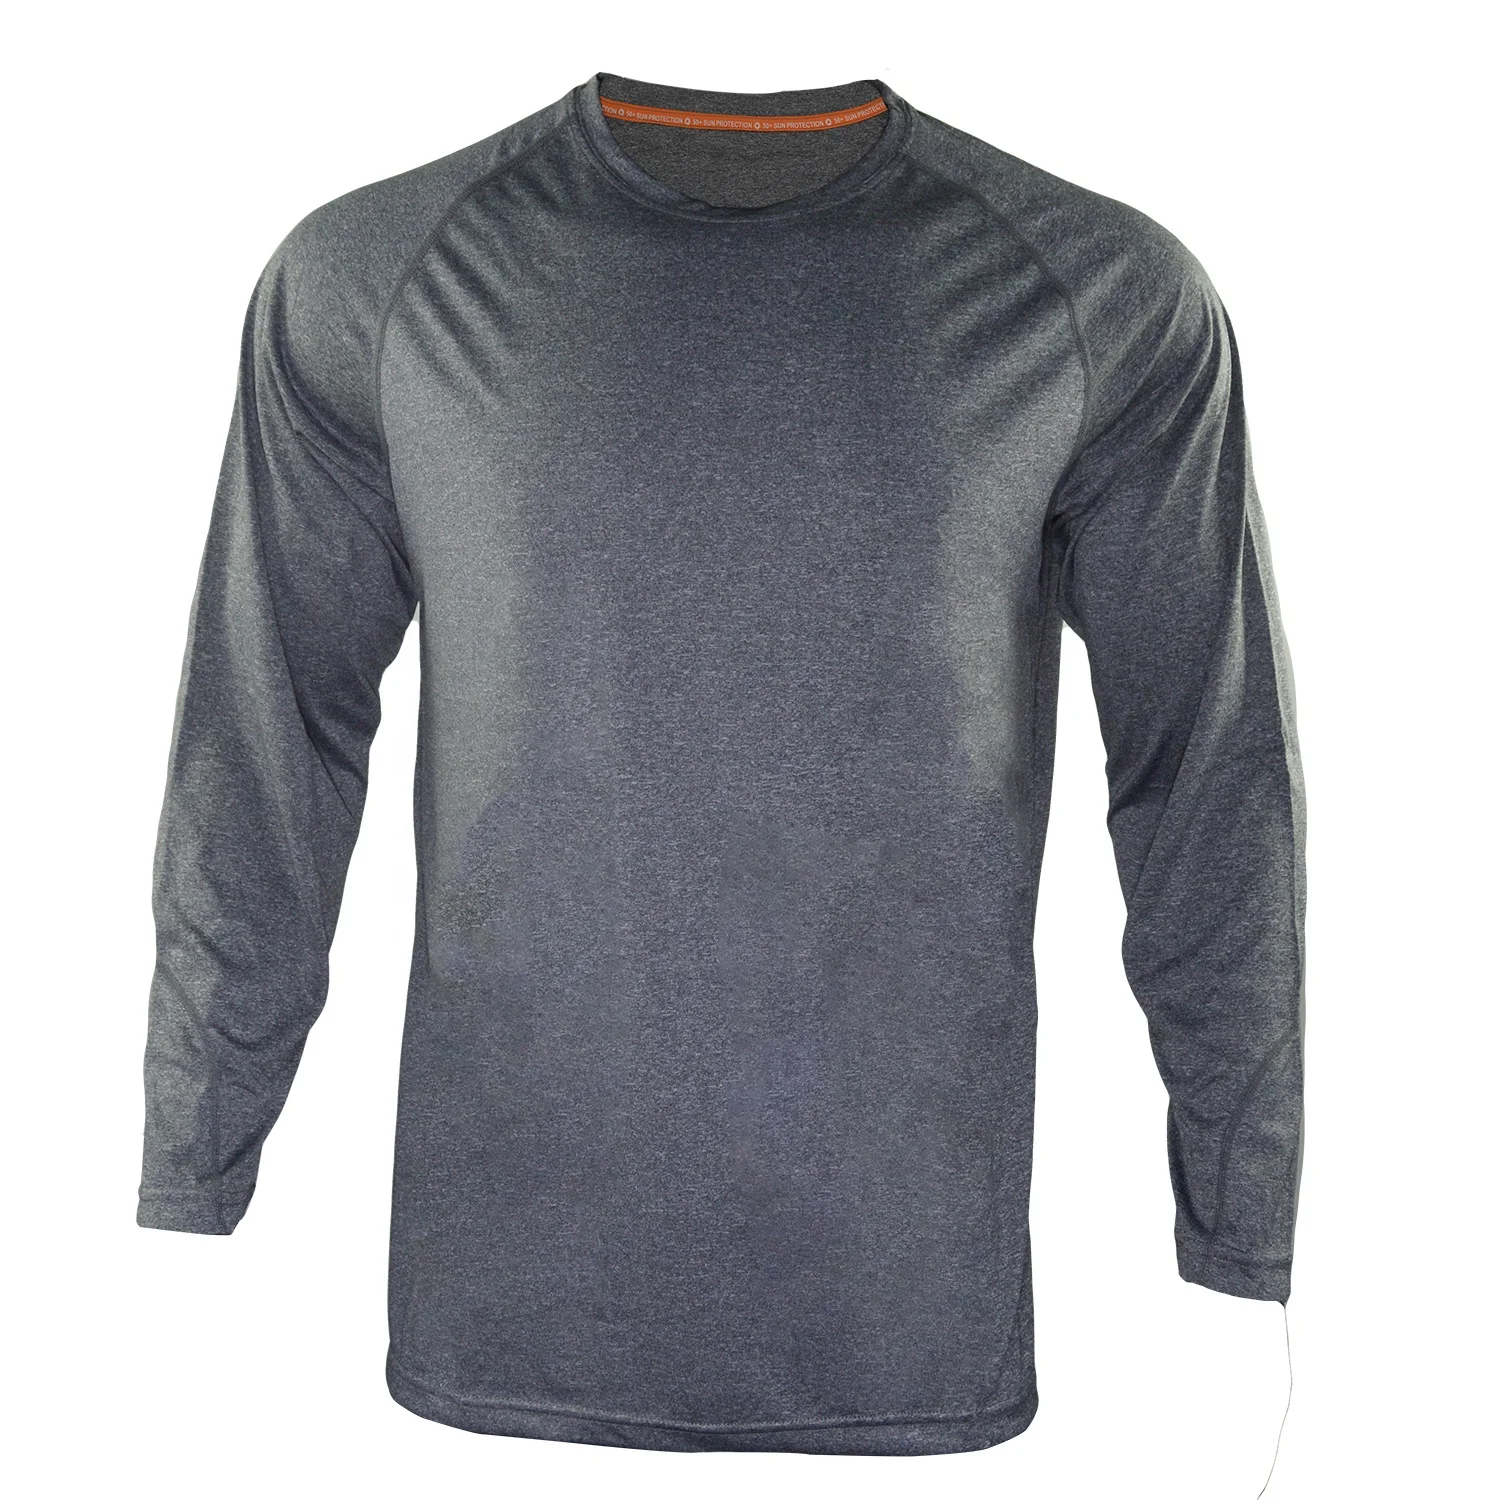 Blank gray mens wicking uv protection